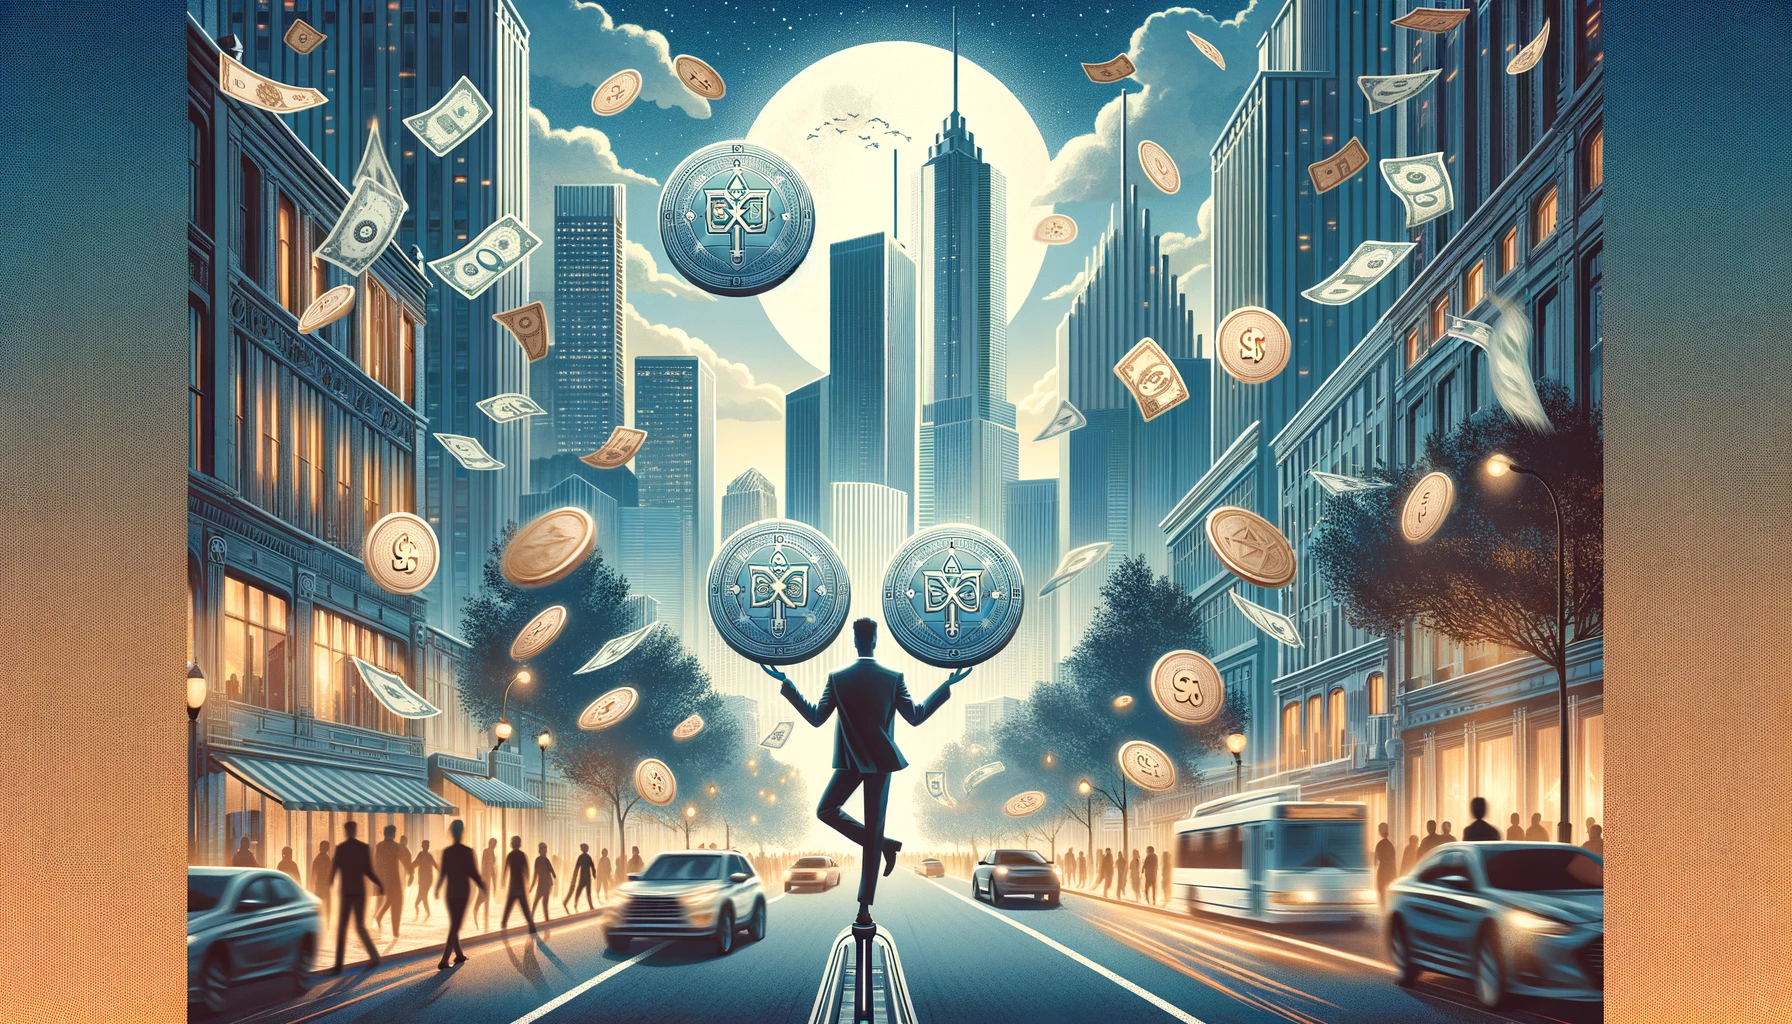 An illustration depicting a person skillfully balancing two pentacles against an urban backdrop, symbolizing the essence of navigating through life's complexities and maintaining balance amidst the bustling dynamics of modern living. The image encapsulates the themes of adaptability, flexibility, and equilibrium in the face of multiple responsibilities, as suggested by the Two of Pentacles card.